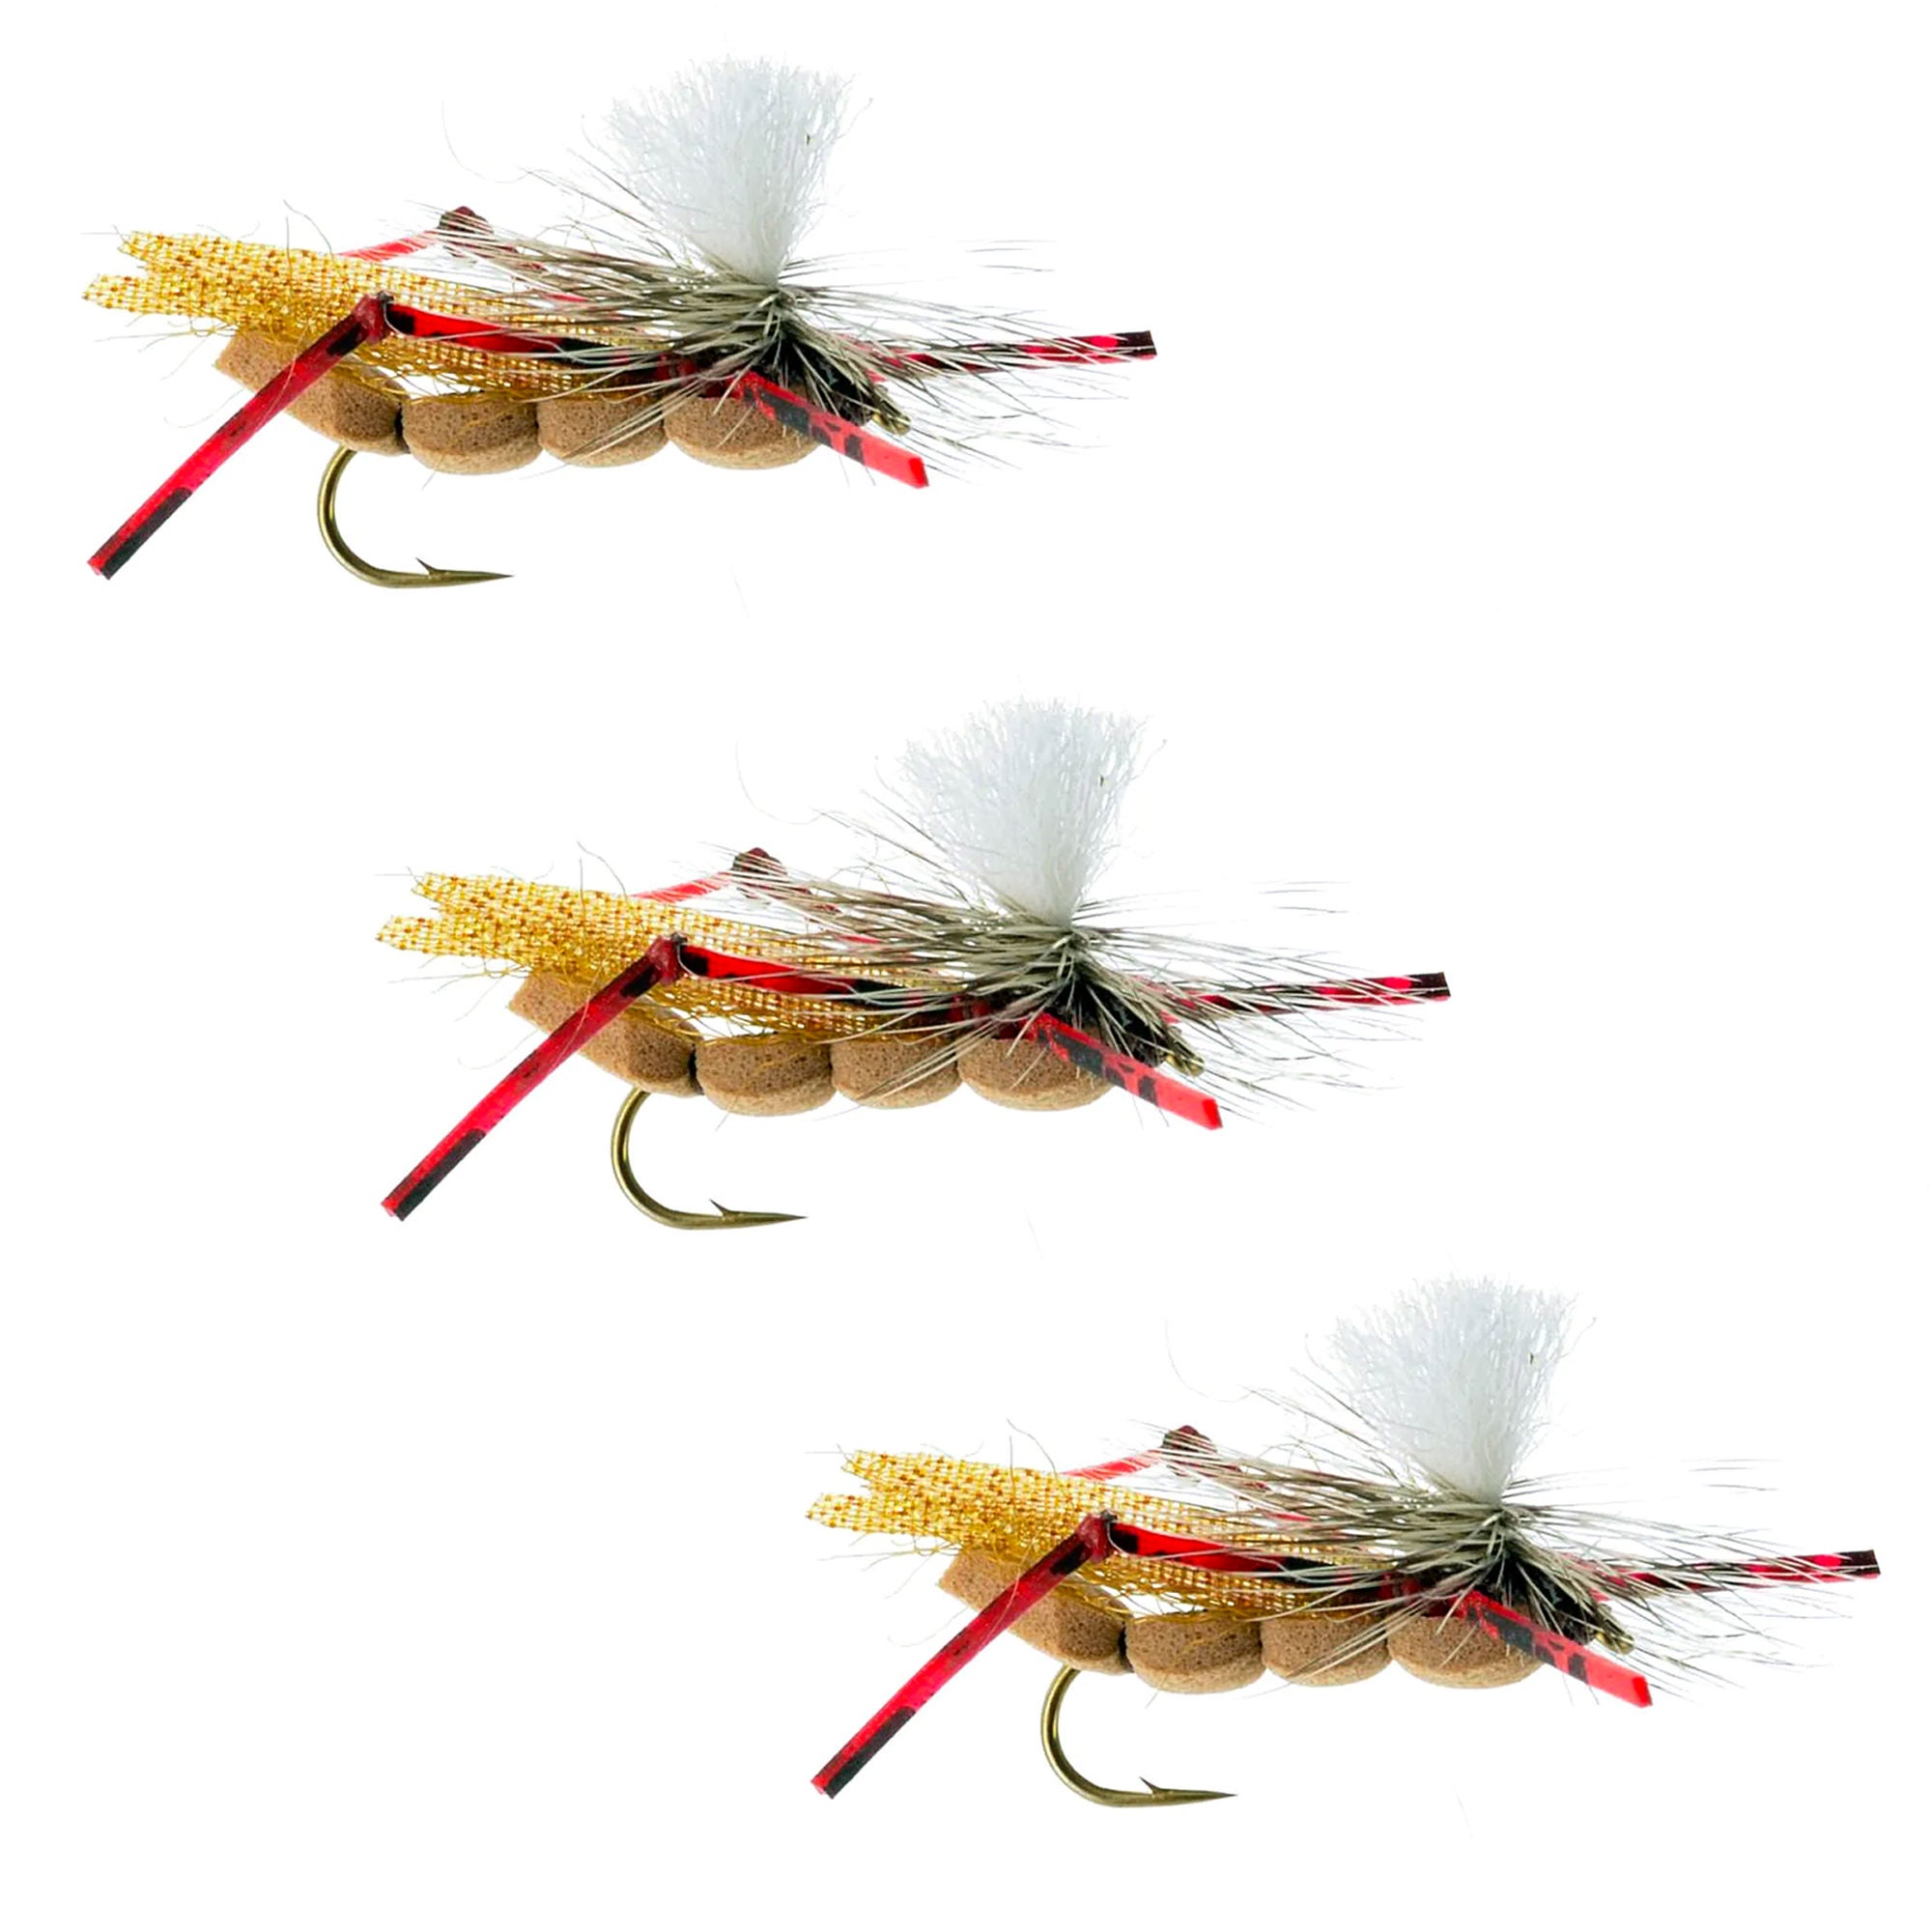 Buy Red Legs Hopper Fly Grasshopper Flies Terrestrial Flies for Fly Fishing  Handmade Flies for Your Fly Box 3 Pack Online in India 